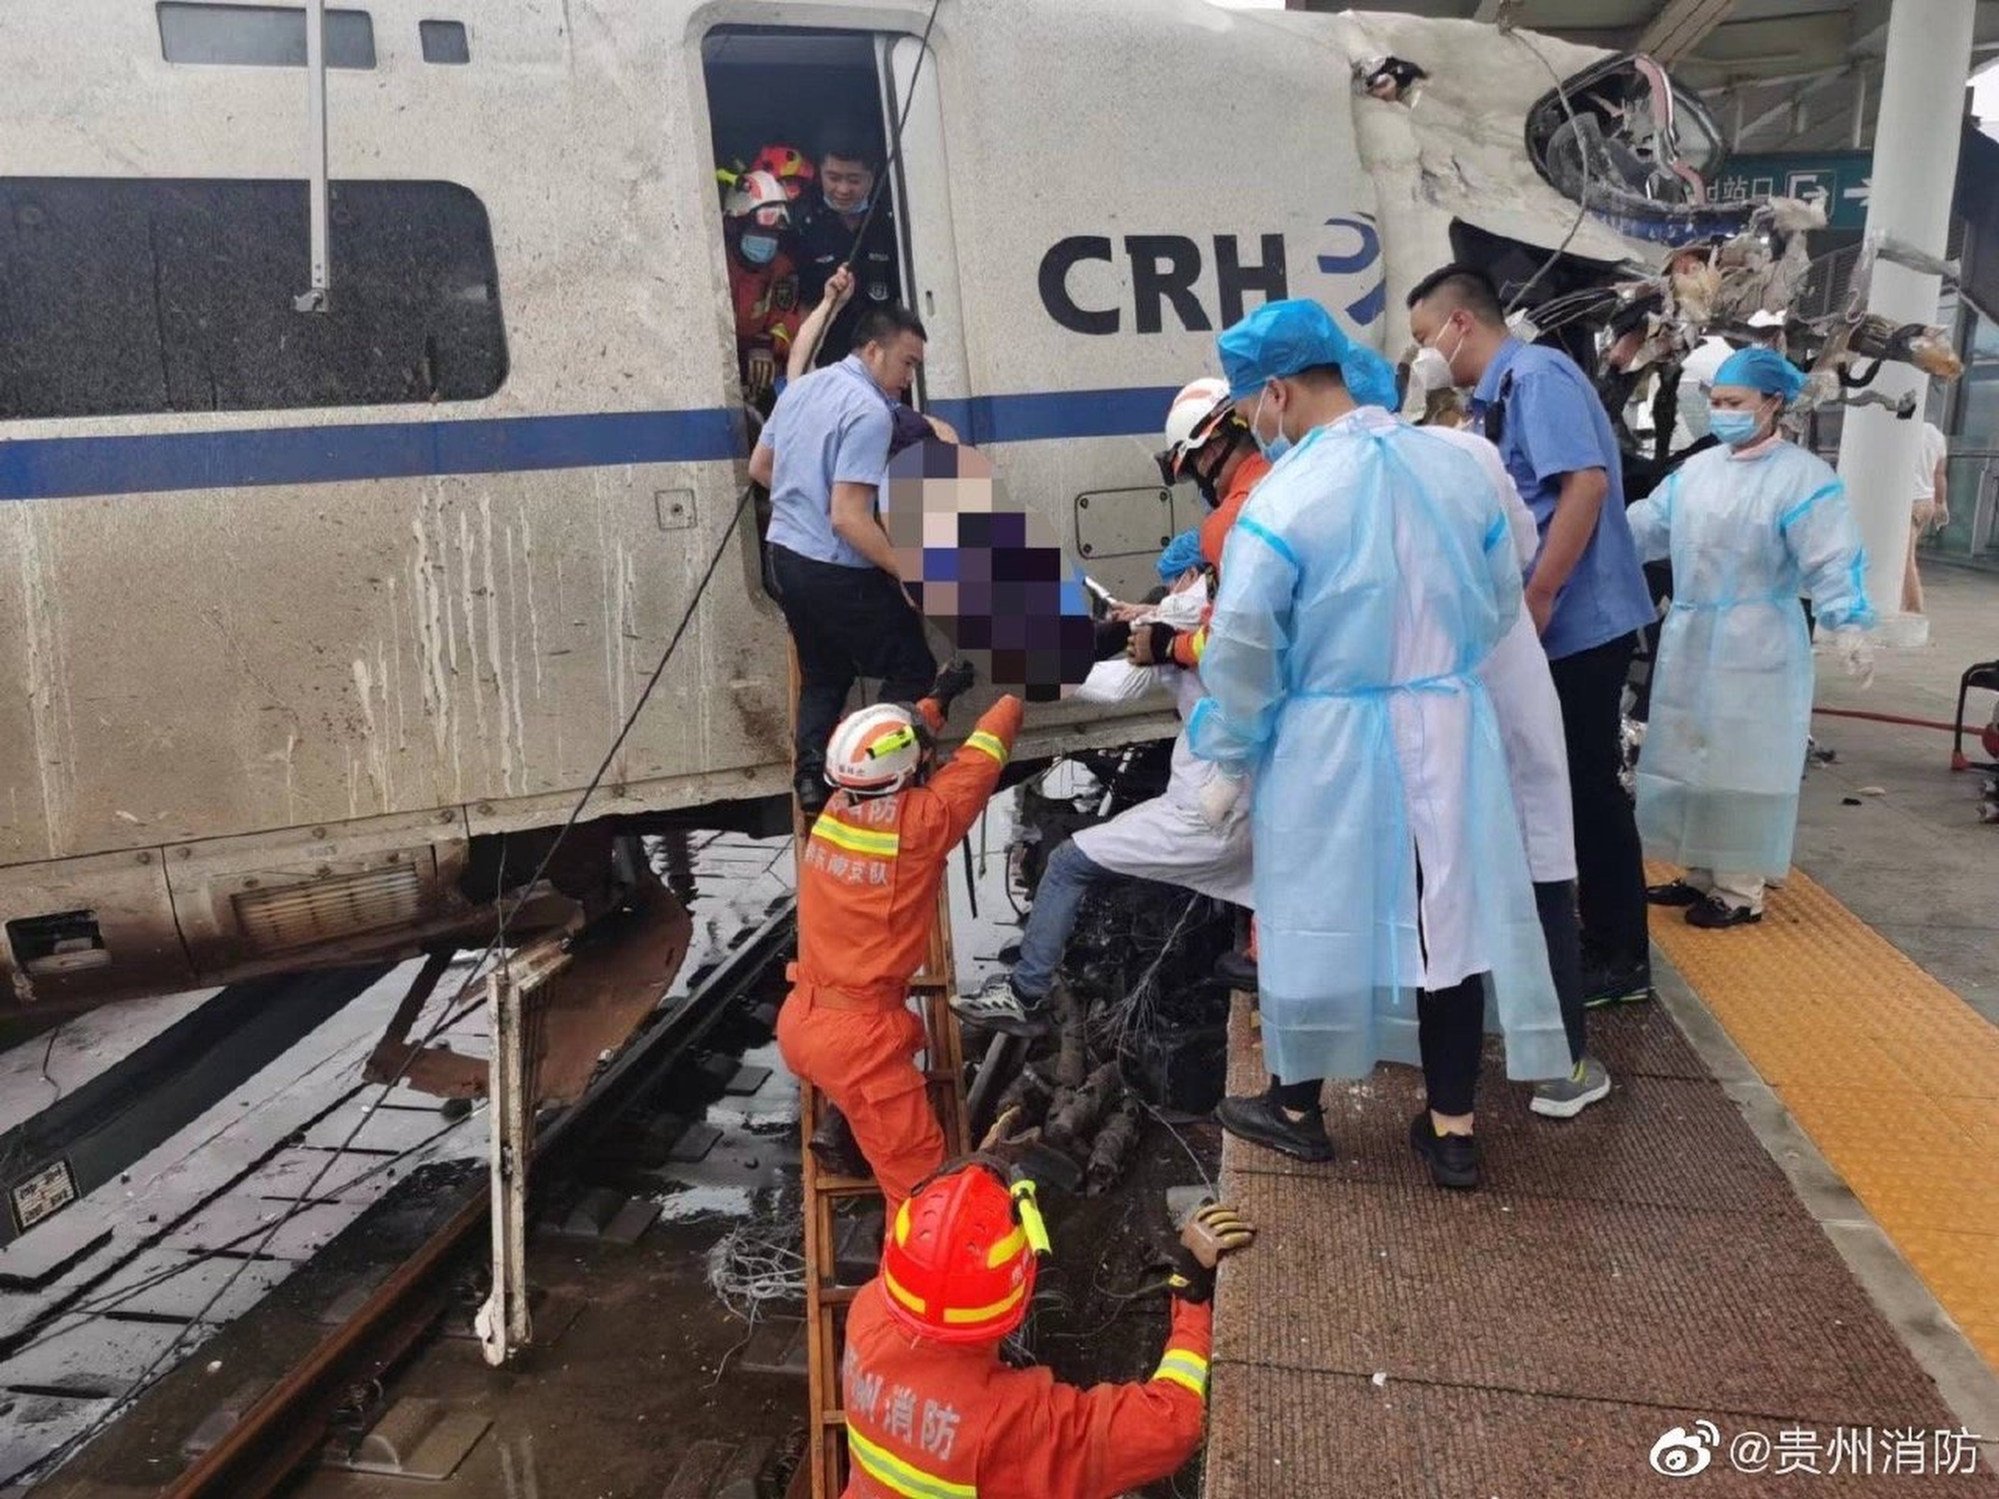 China: High-speed train crashed, the driver died on the spot - Photo 3.